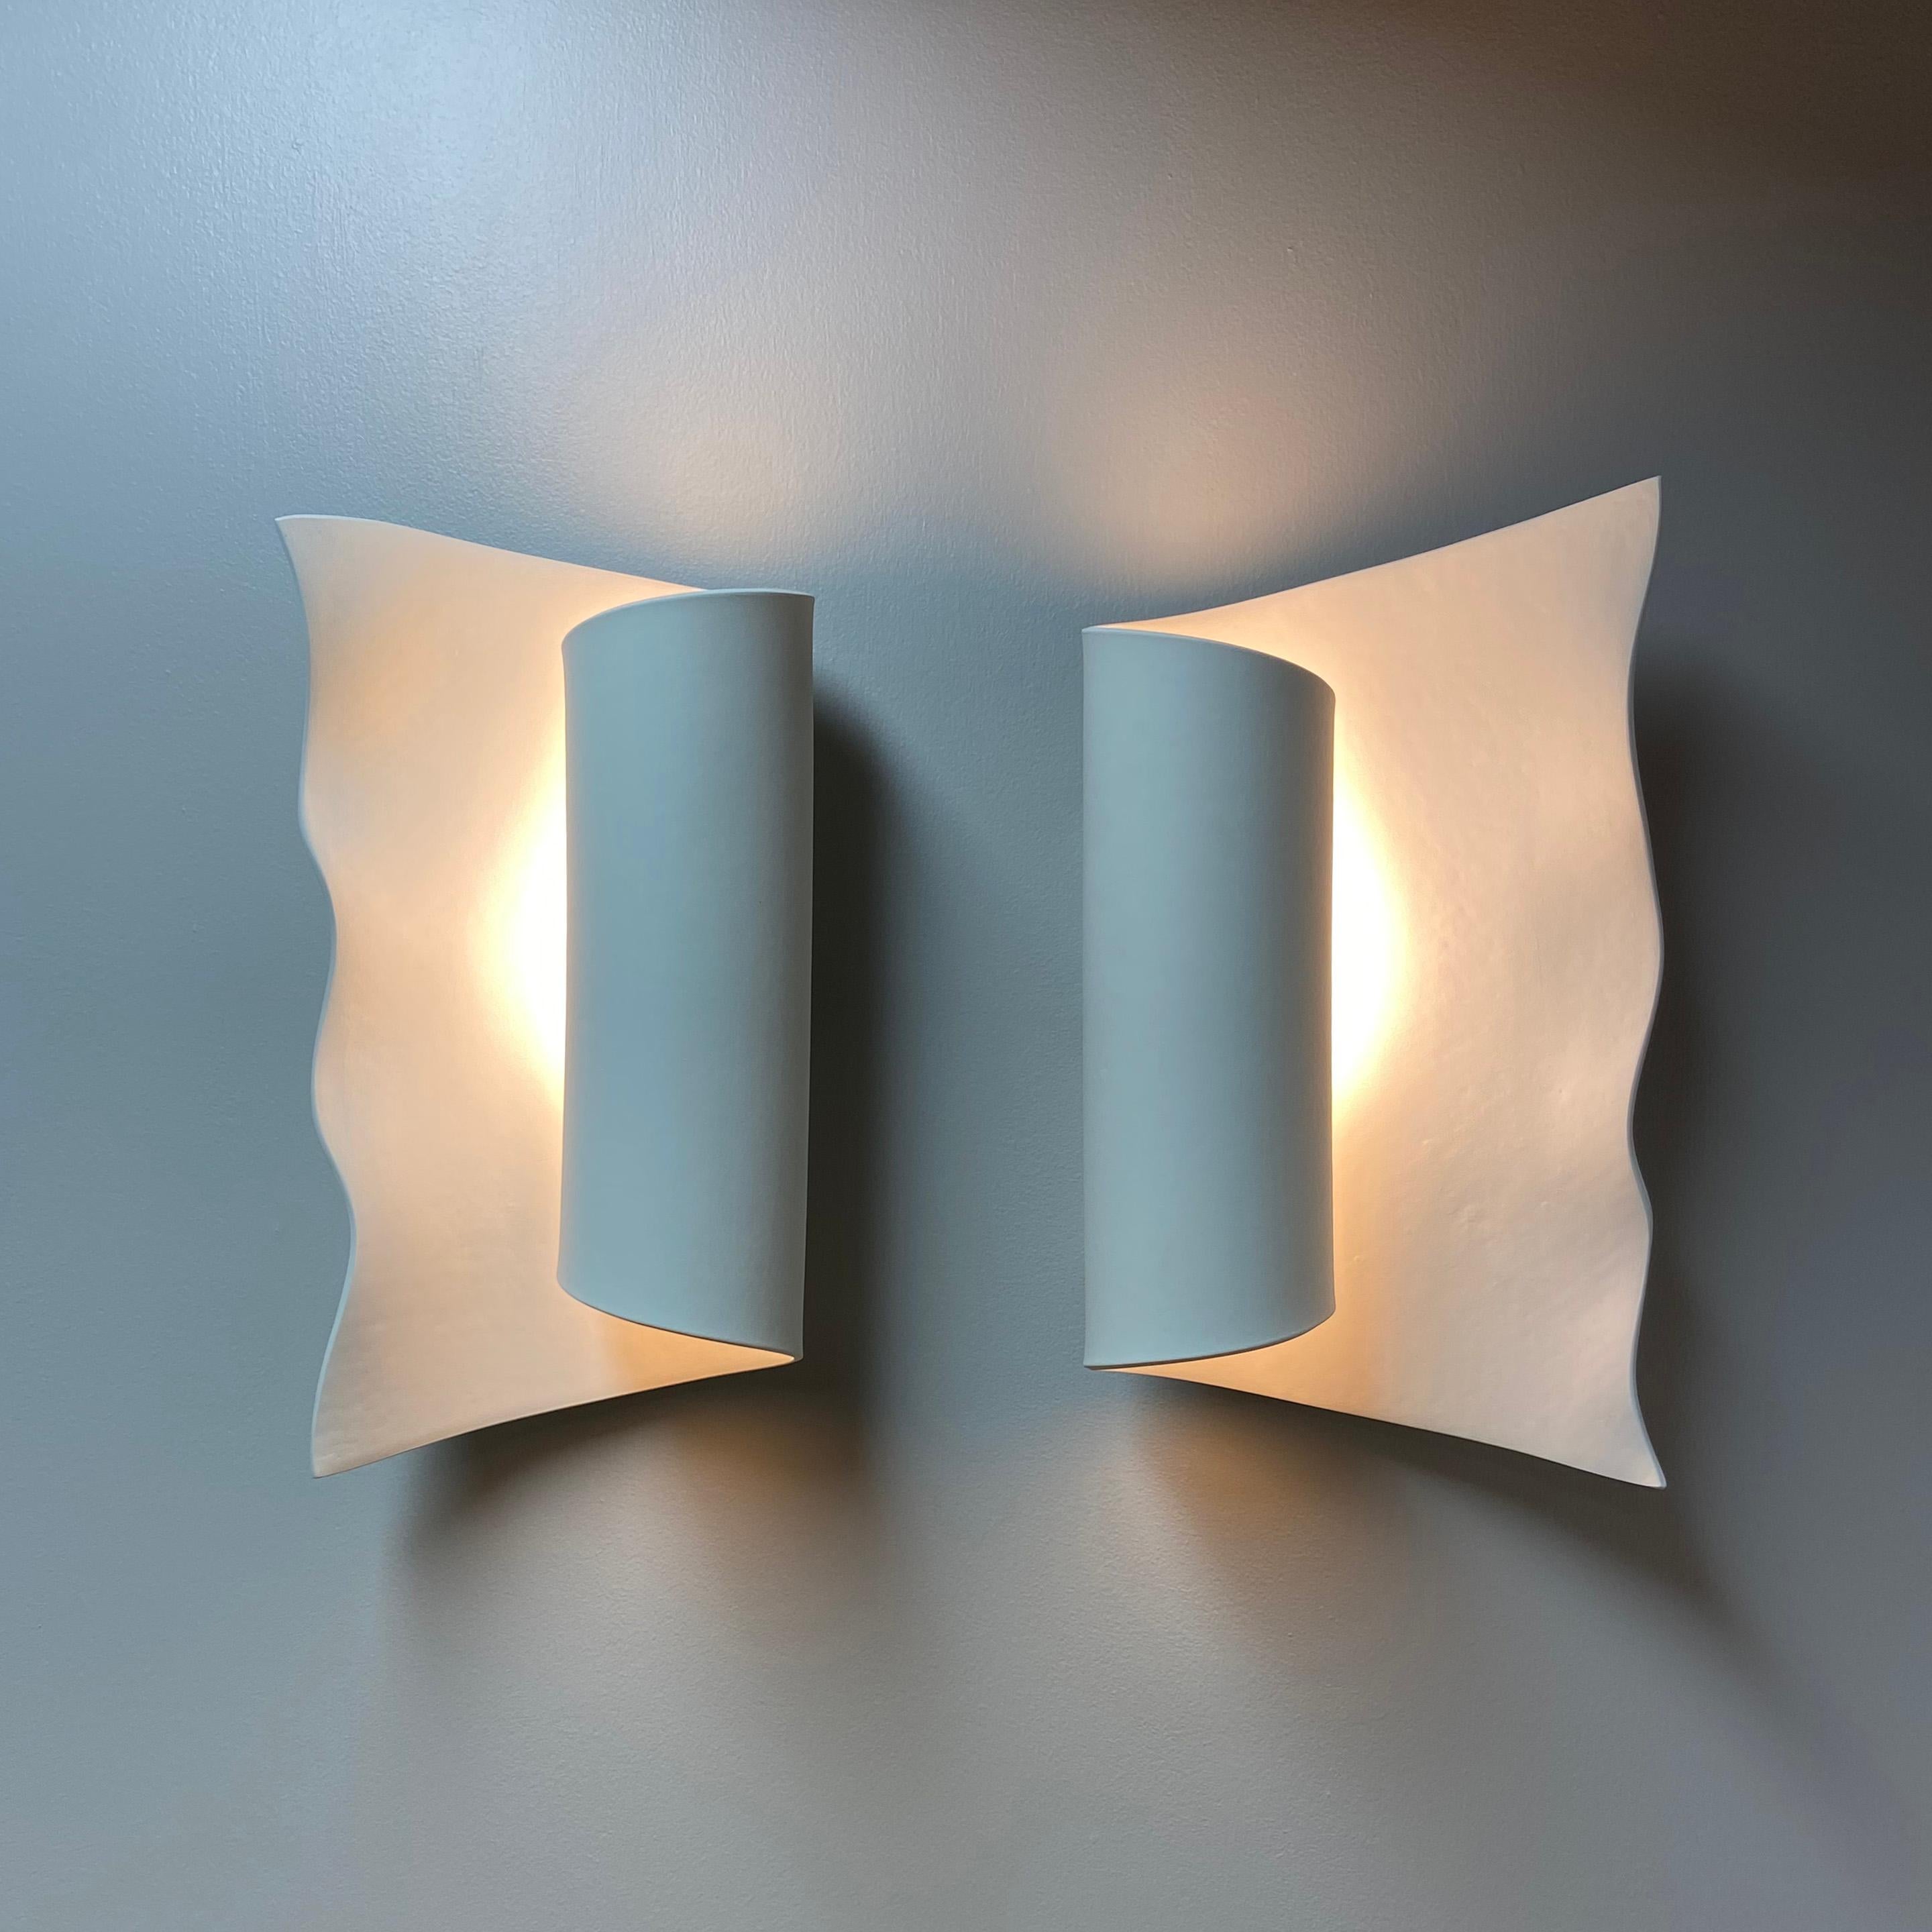 Minimalist Scroll Scalloped Ceramic Wall Sconce Luminaire Pair For Sale